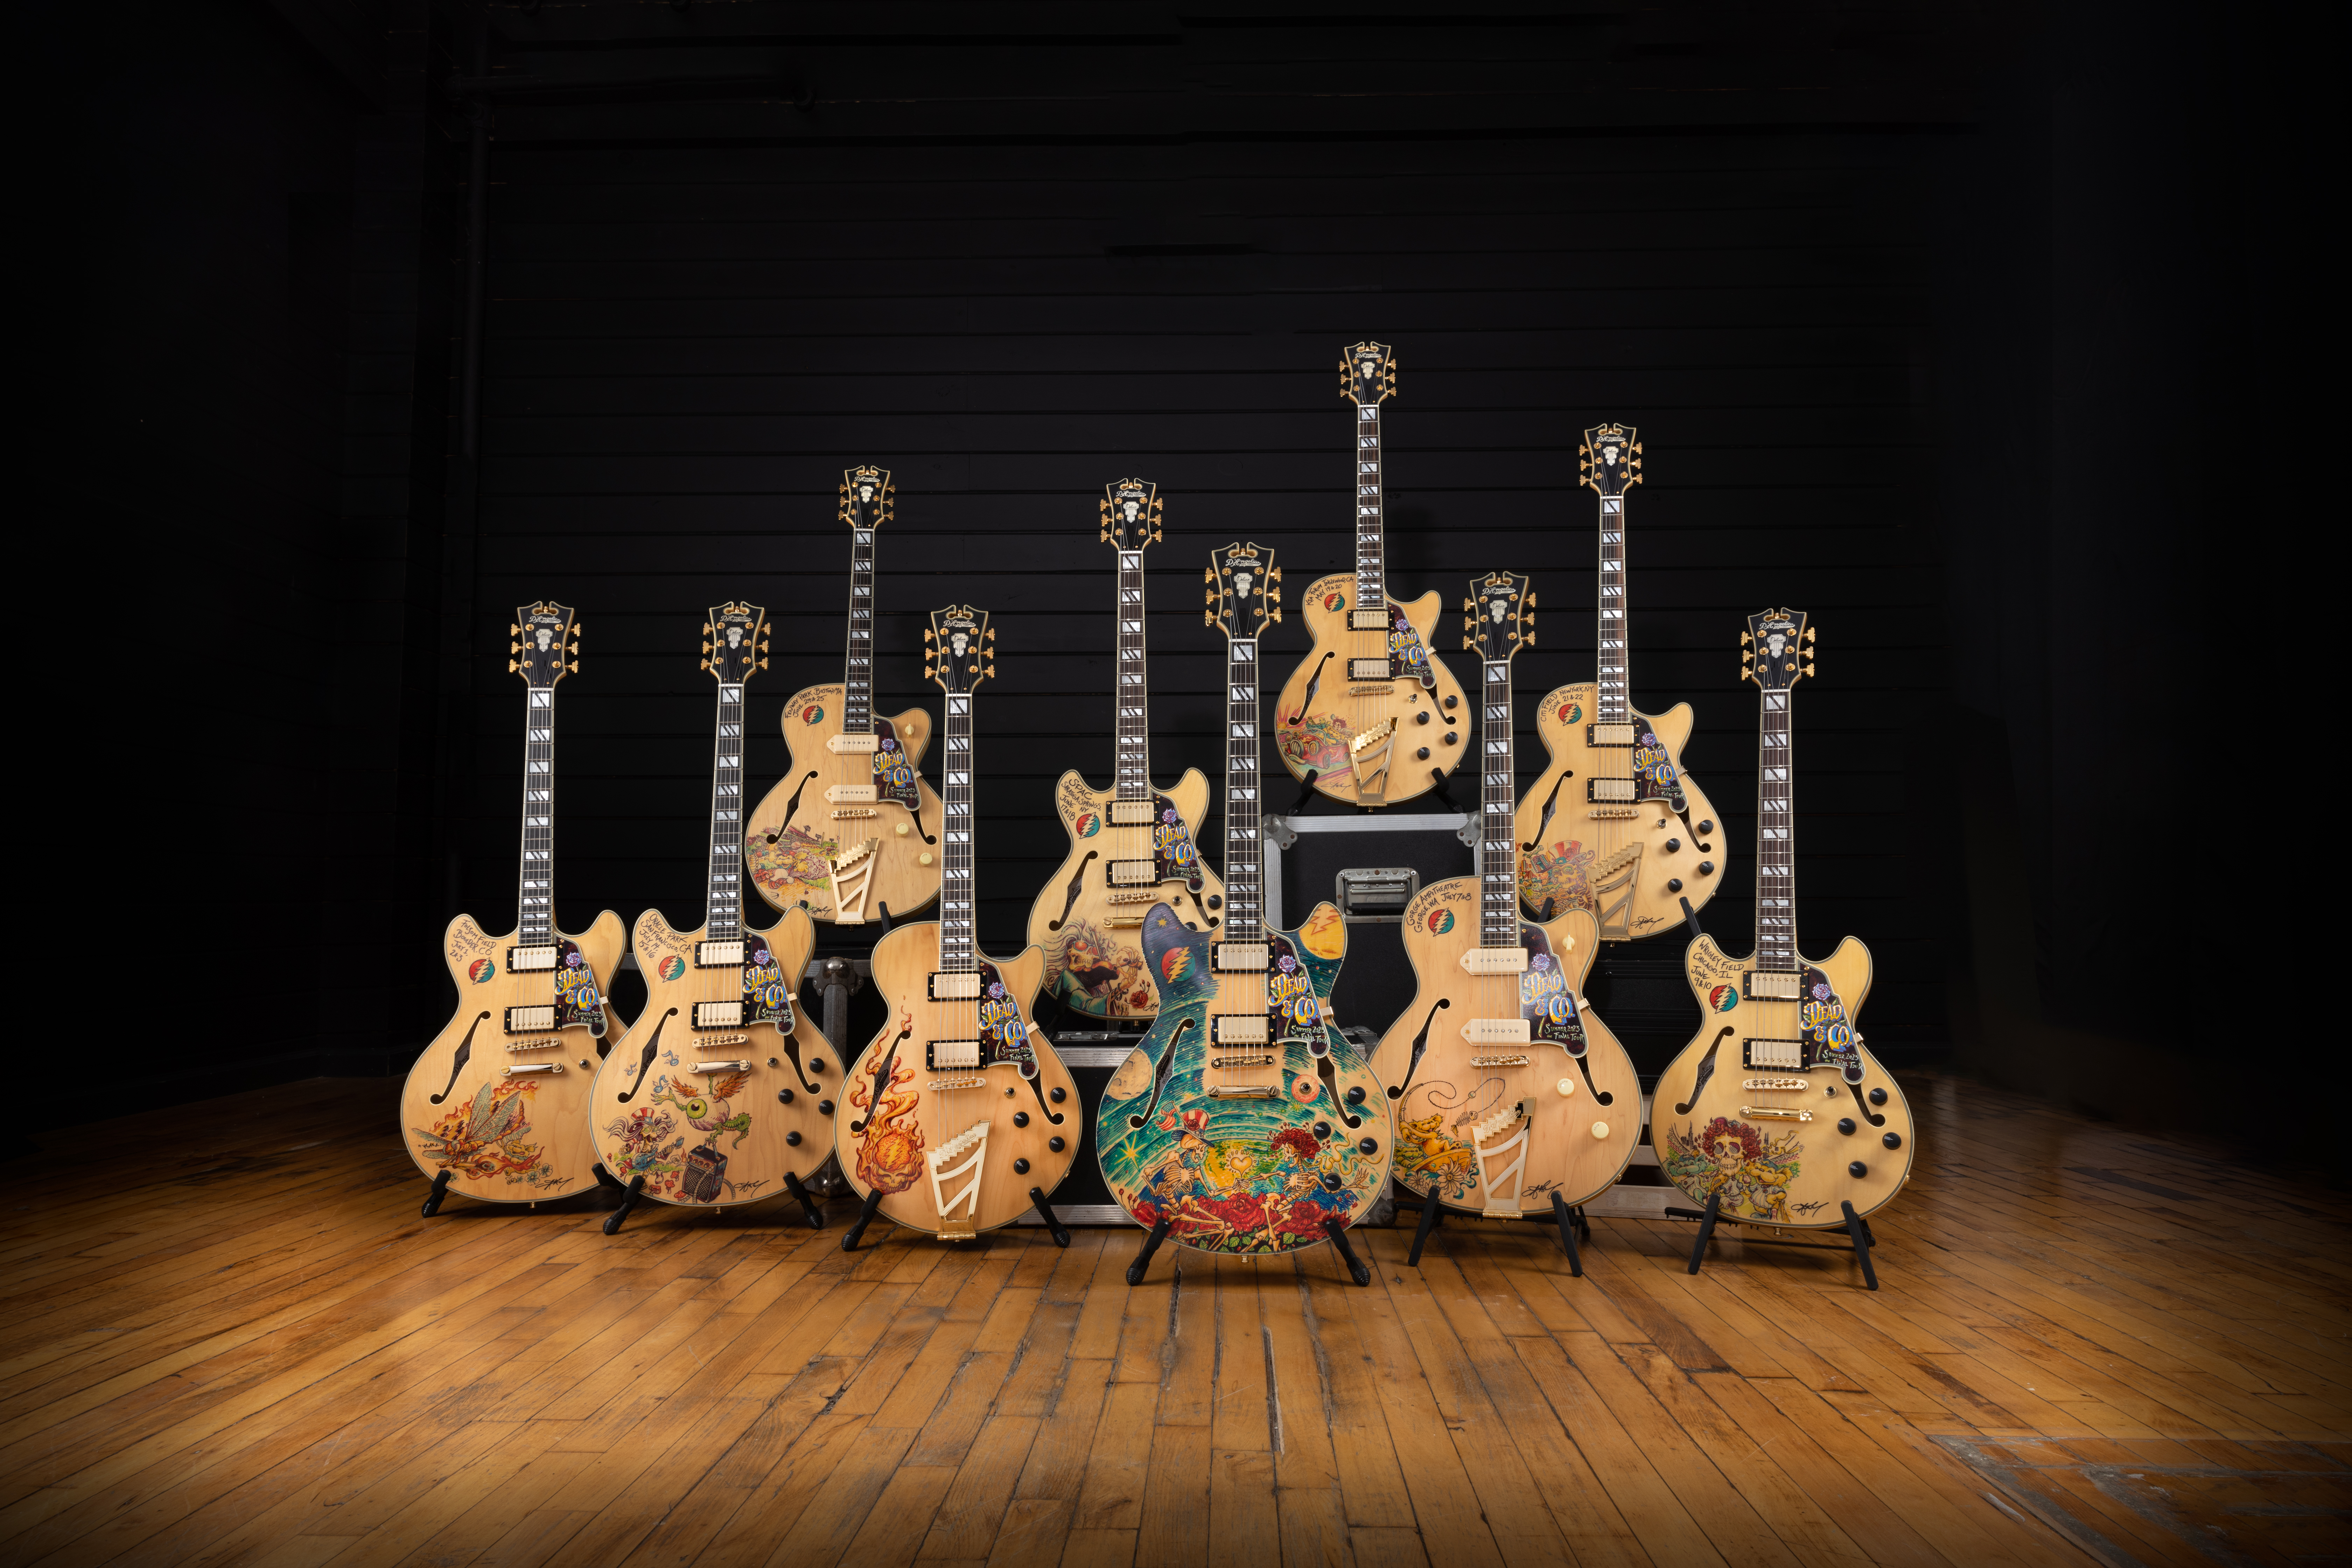 DEAD & COMPANY TO AUCTION CUSTOM SIGNED GUITARS AND OTHER ITEMS ON FINAL TOUR TO SUPPORT CHARITIES